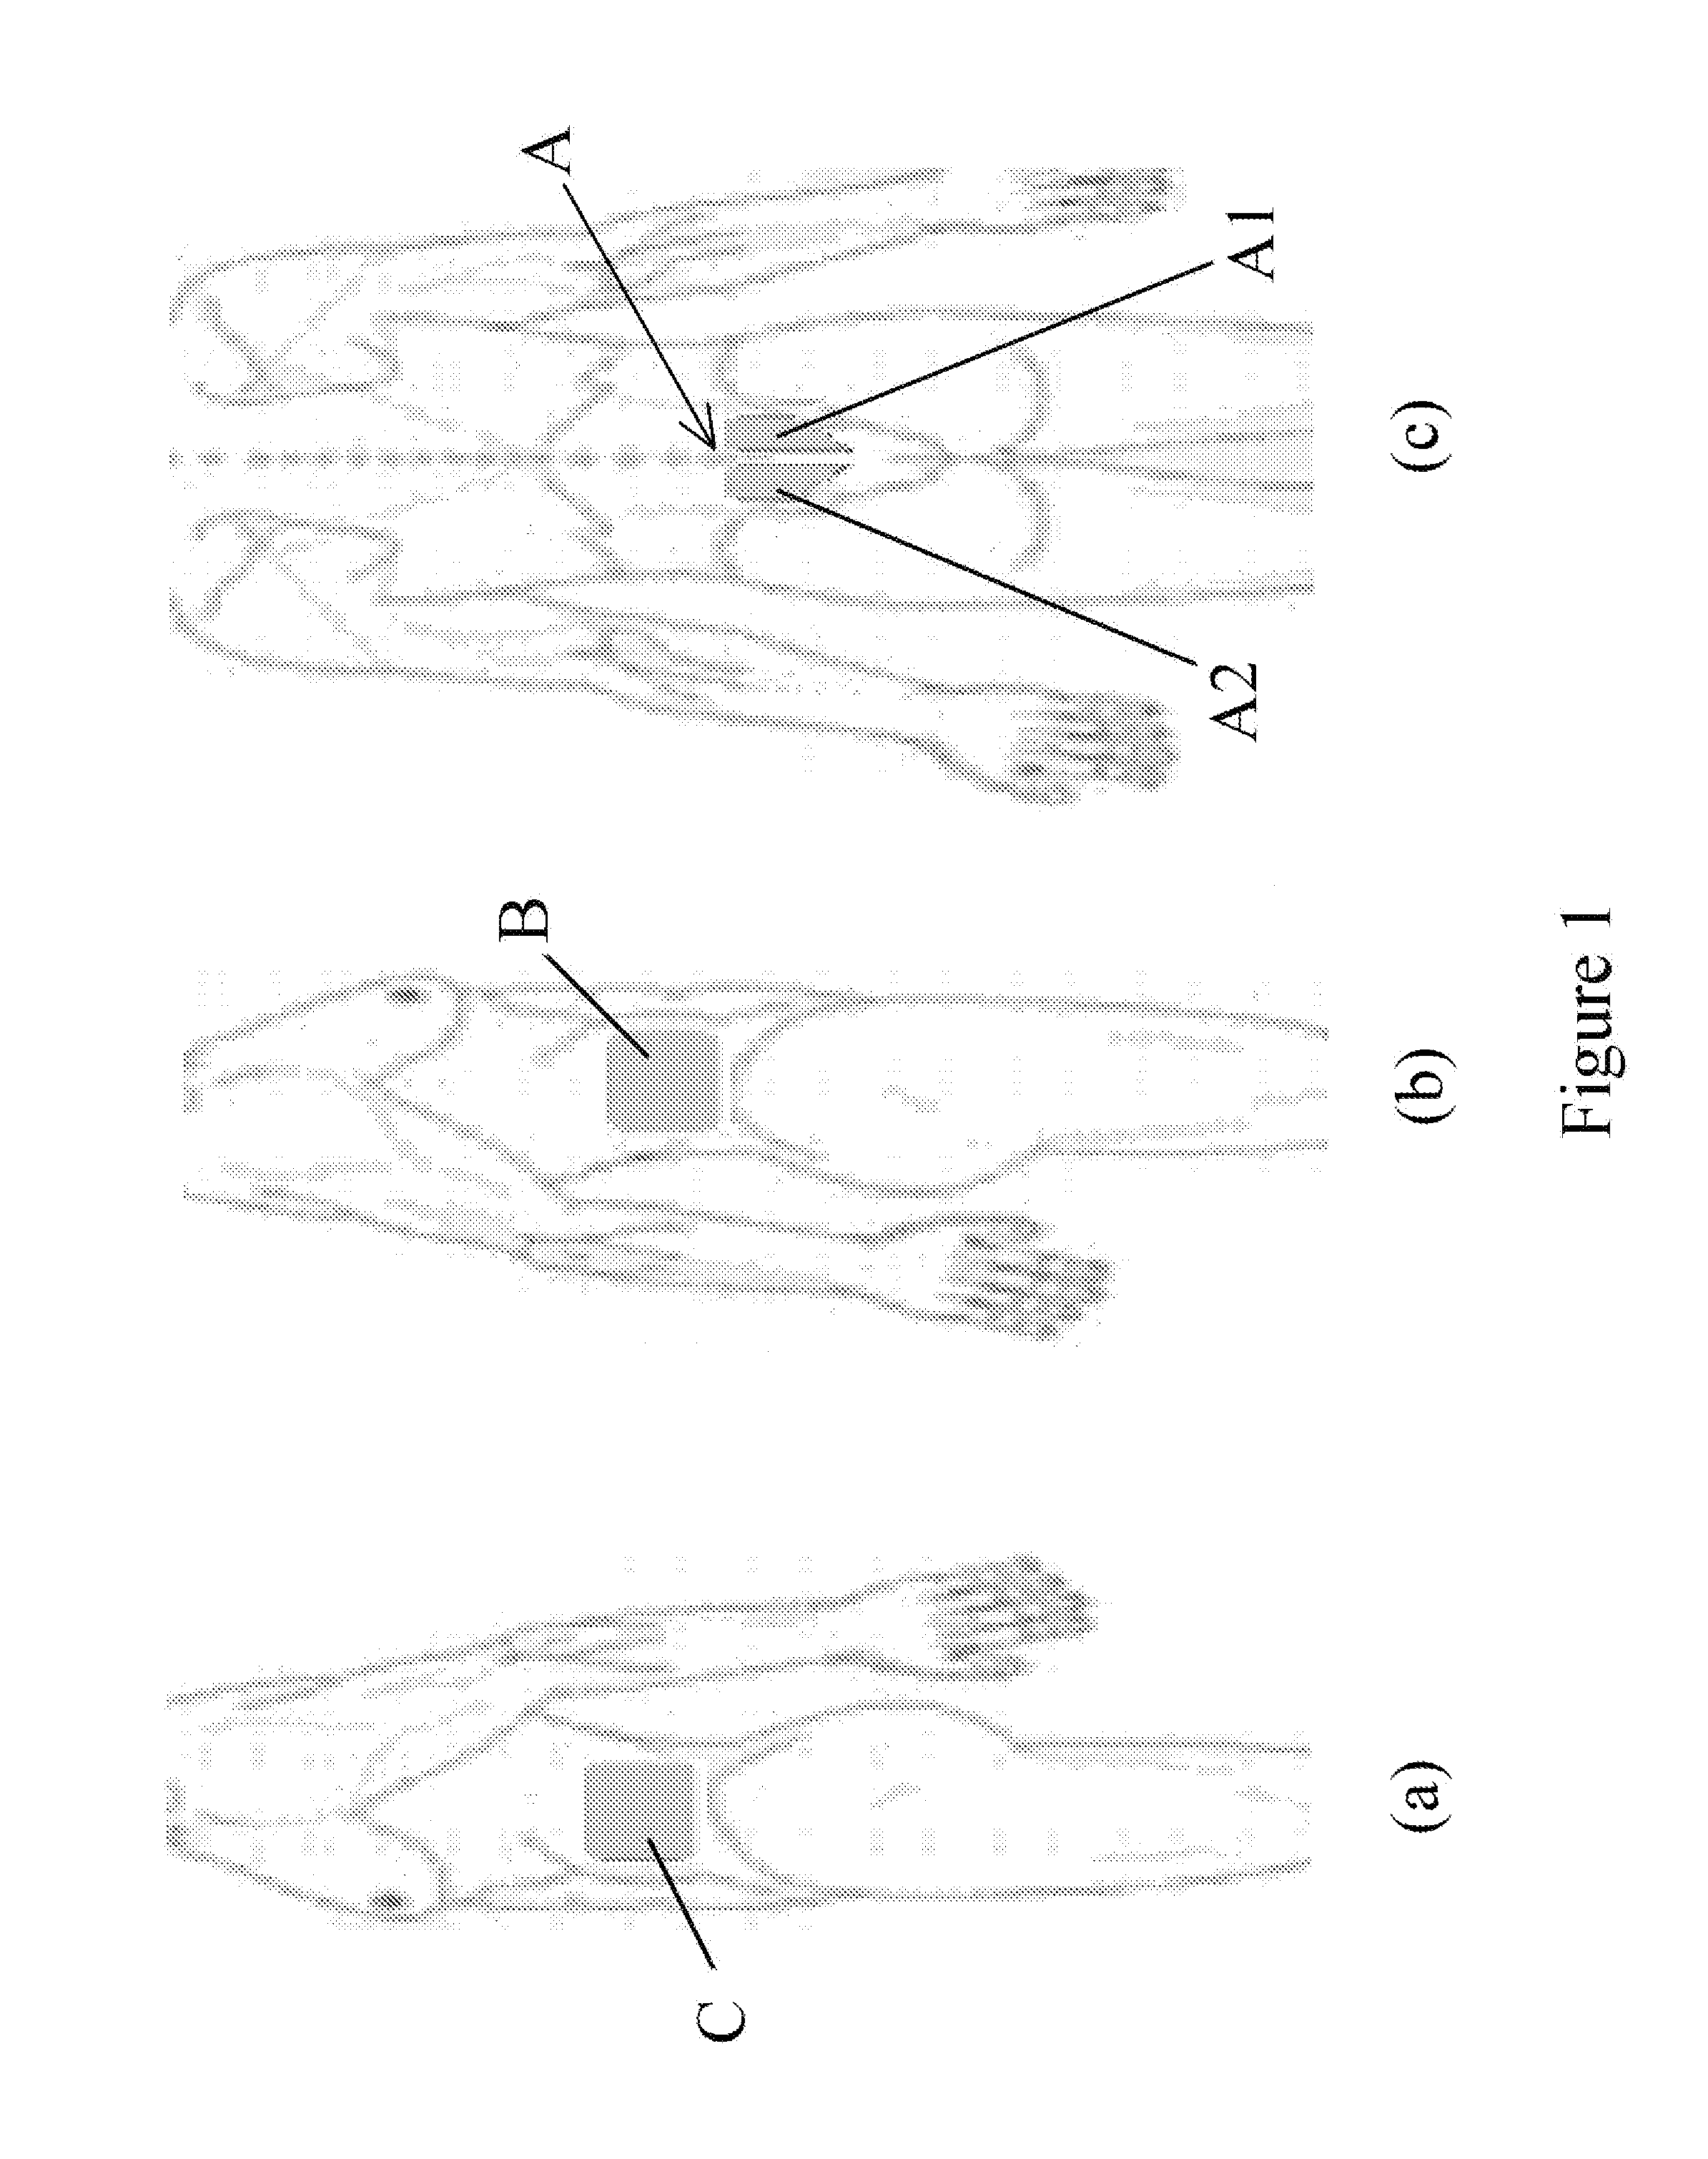 Method and apparatus for stimulating the lower back and abdominal muscles